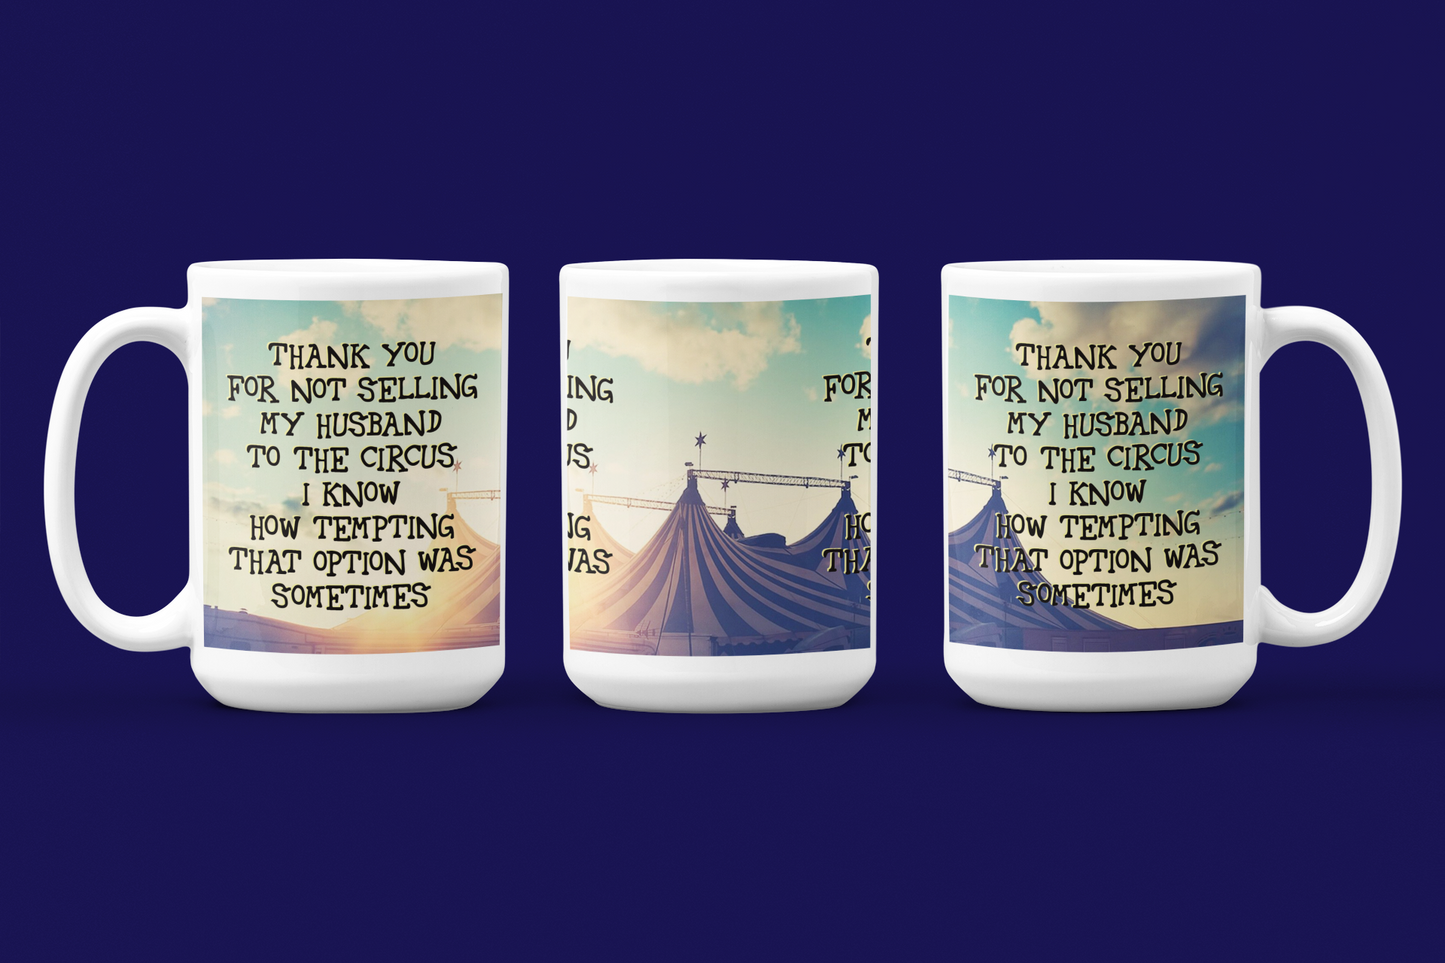 Thank You For Not Selling My (husband/wife) To The Circus Mug